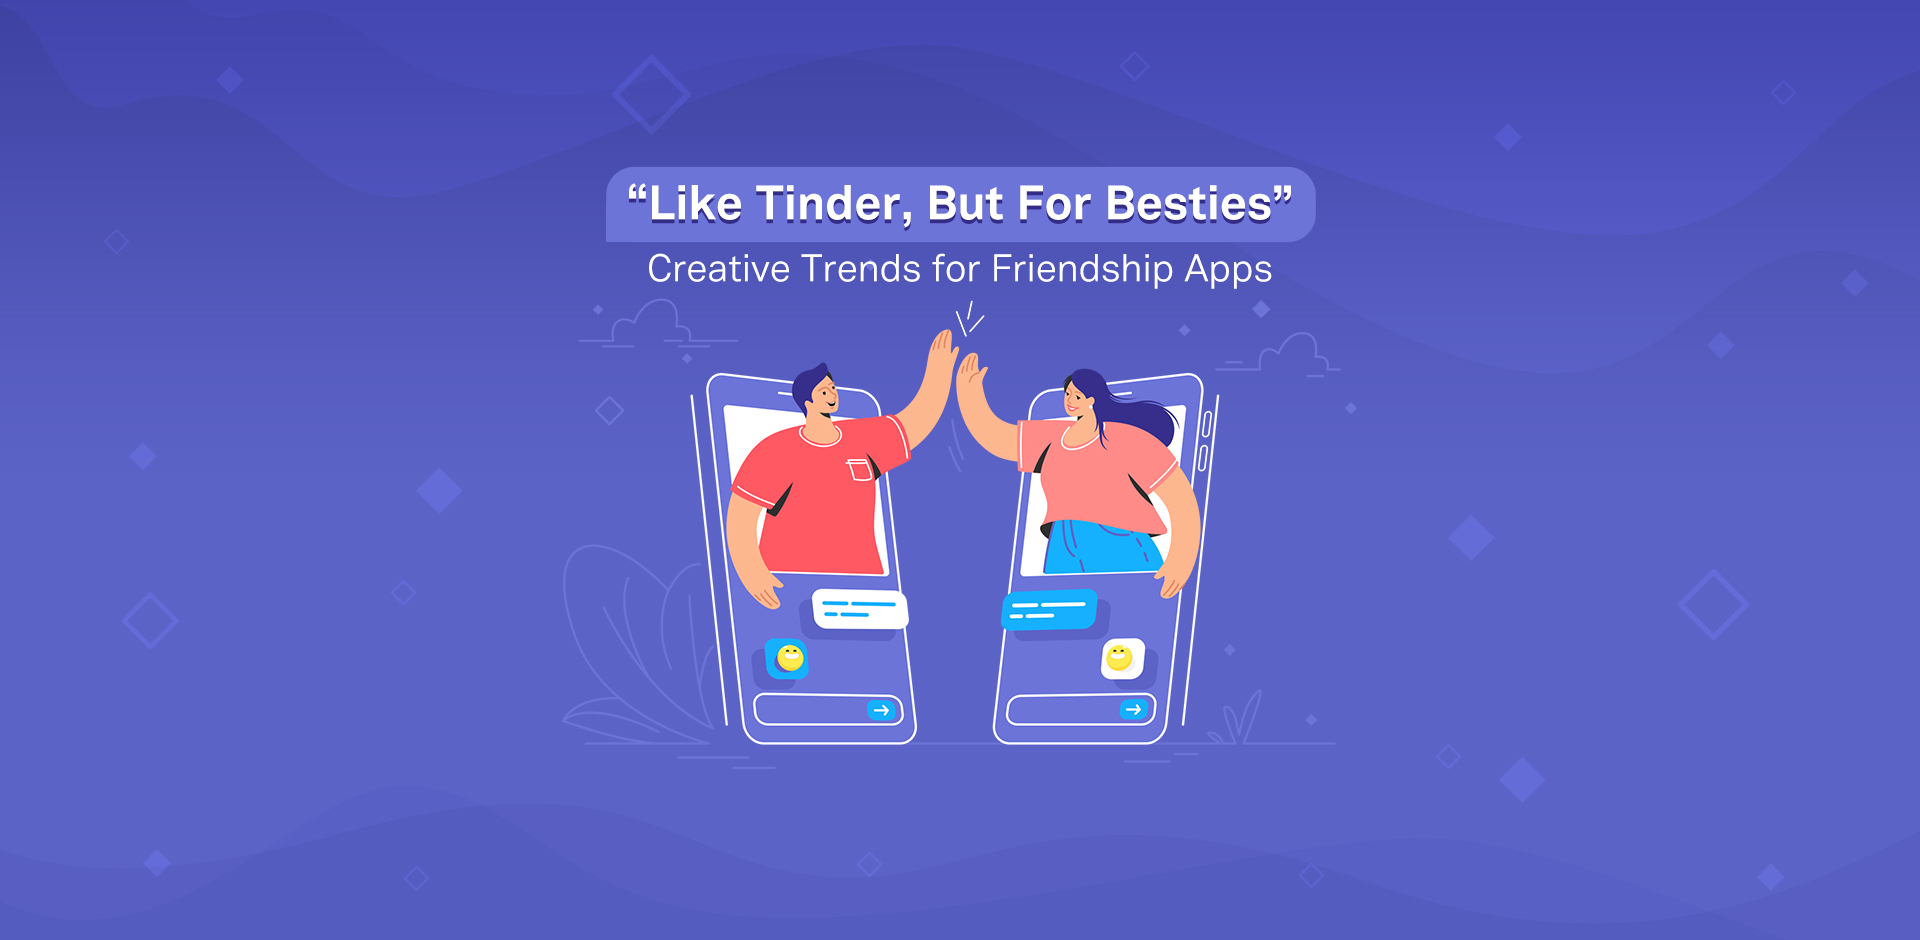 Creative Trends for Friendship Apps